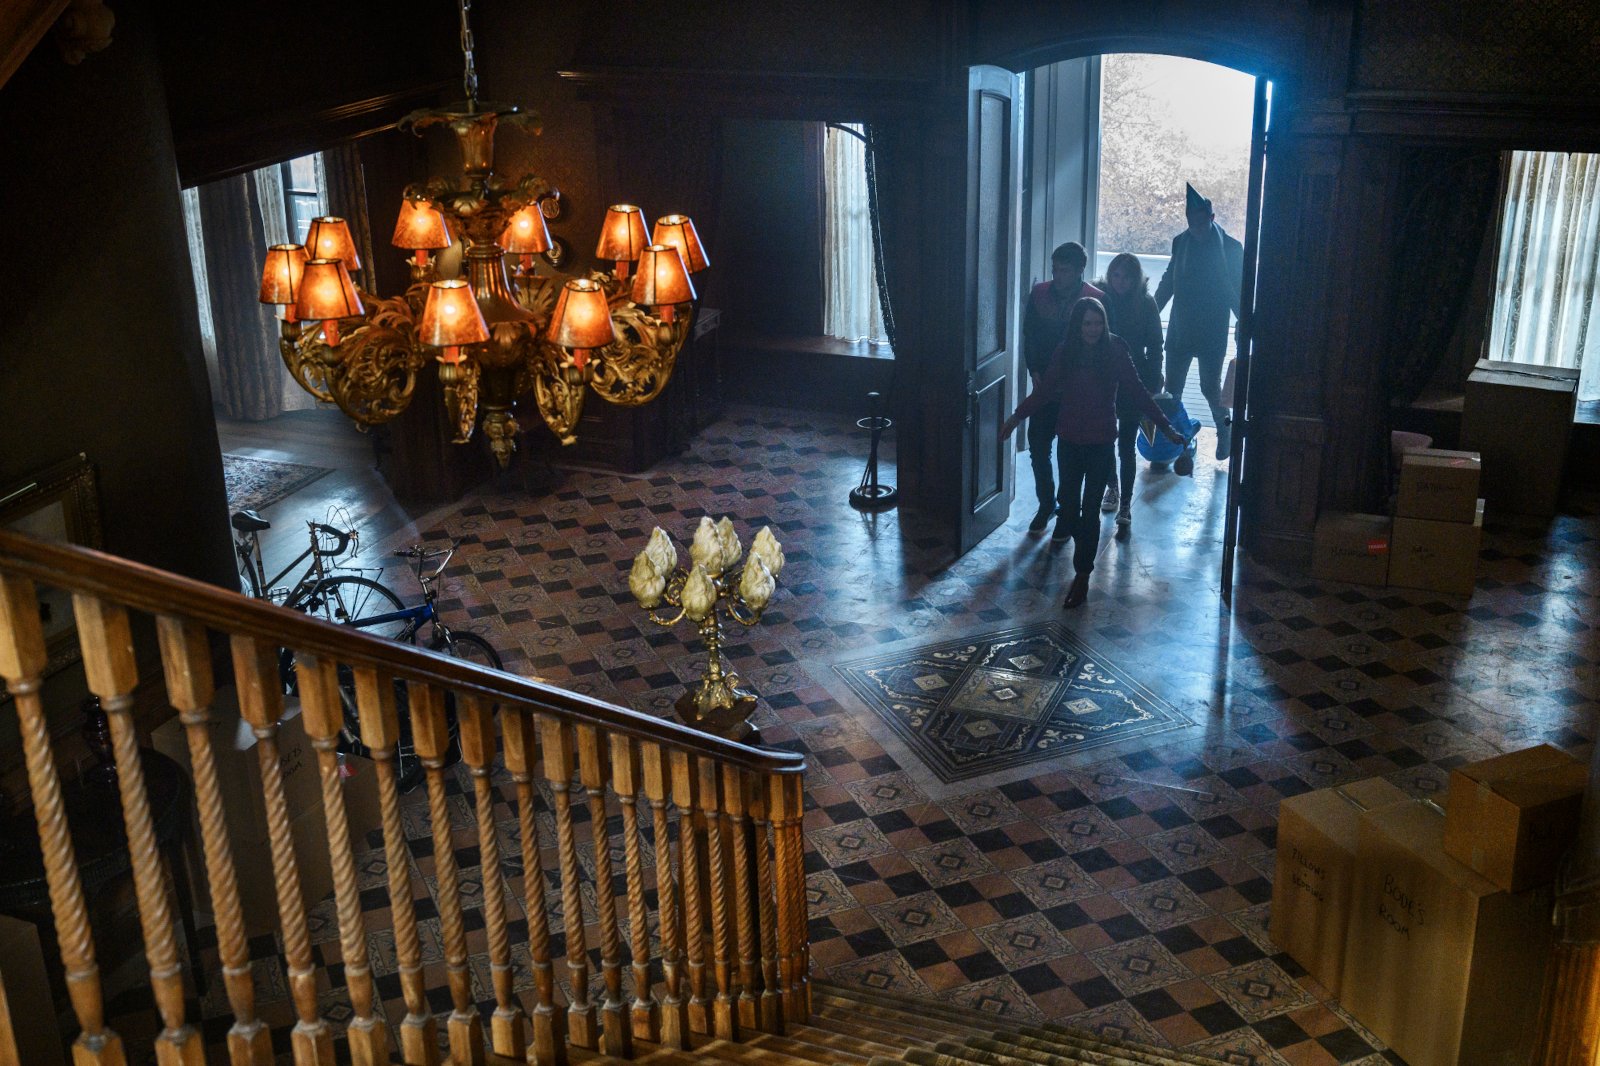 The Locke family arrives at Keyhouse in 'Locke & Key' Season 1 on Netflix. The entrance to the manor is dim, and fans can see a chandelier hanging overhead and a stairway